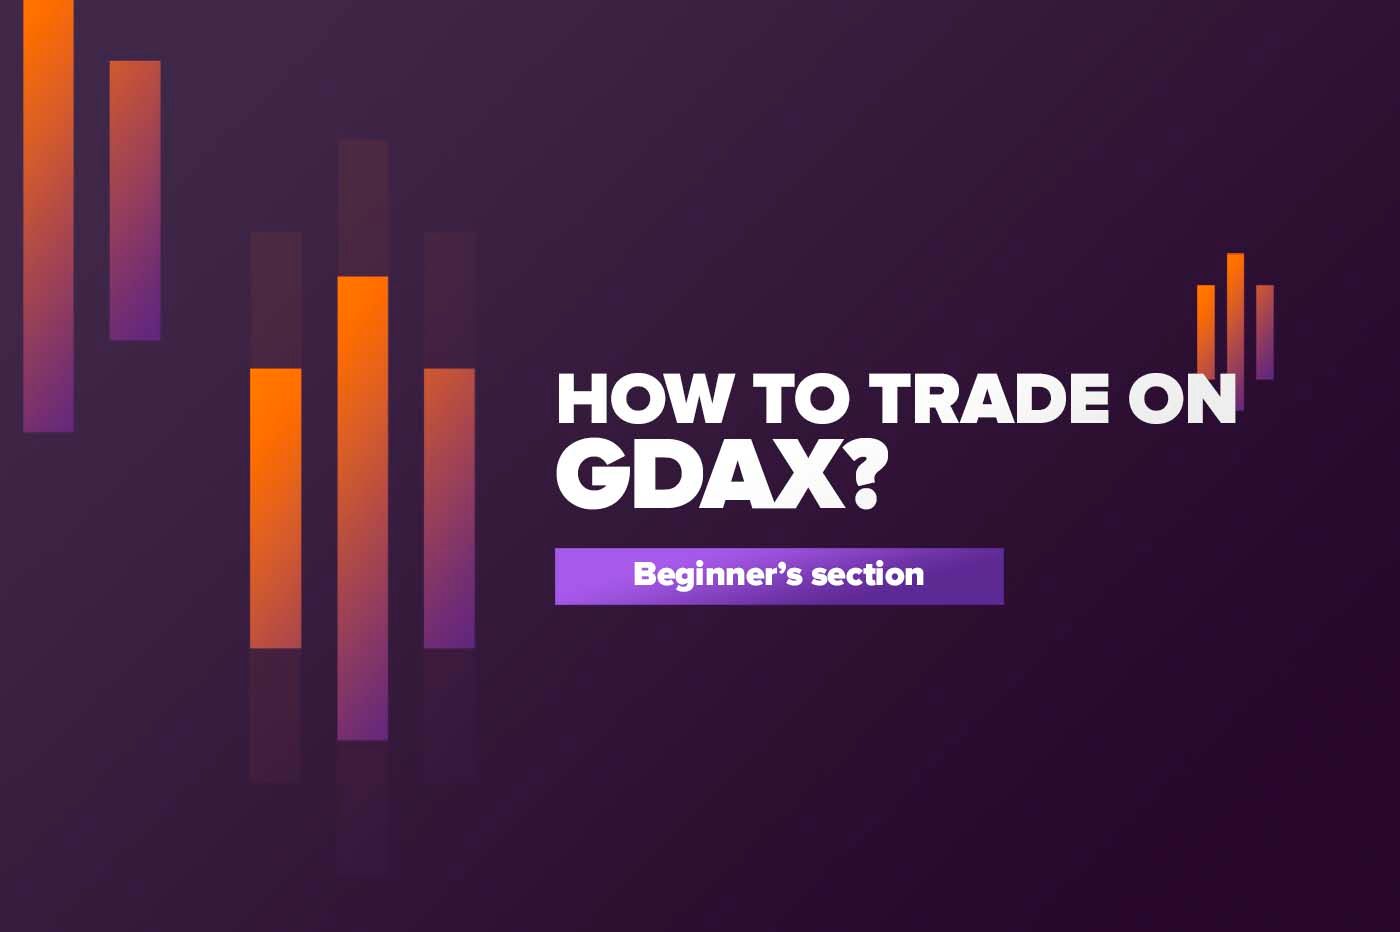 Article How to trade on GDAX?